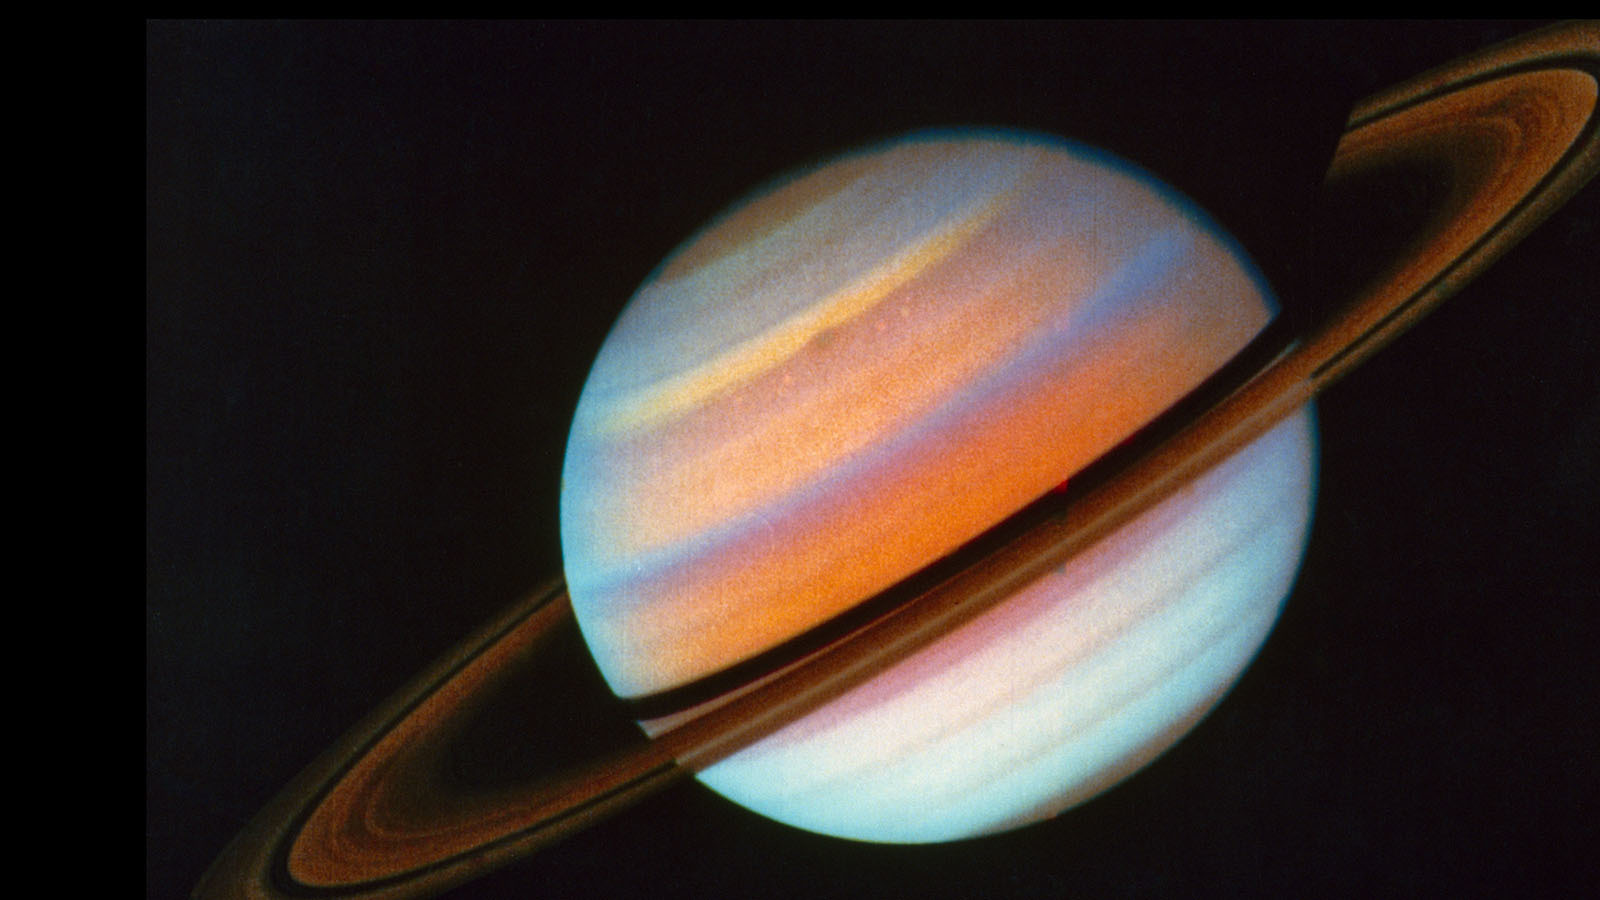 Colorful image of Saturn